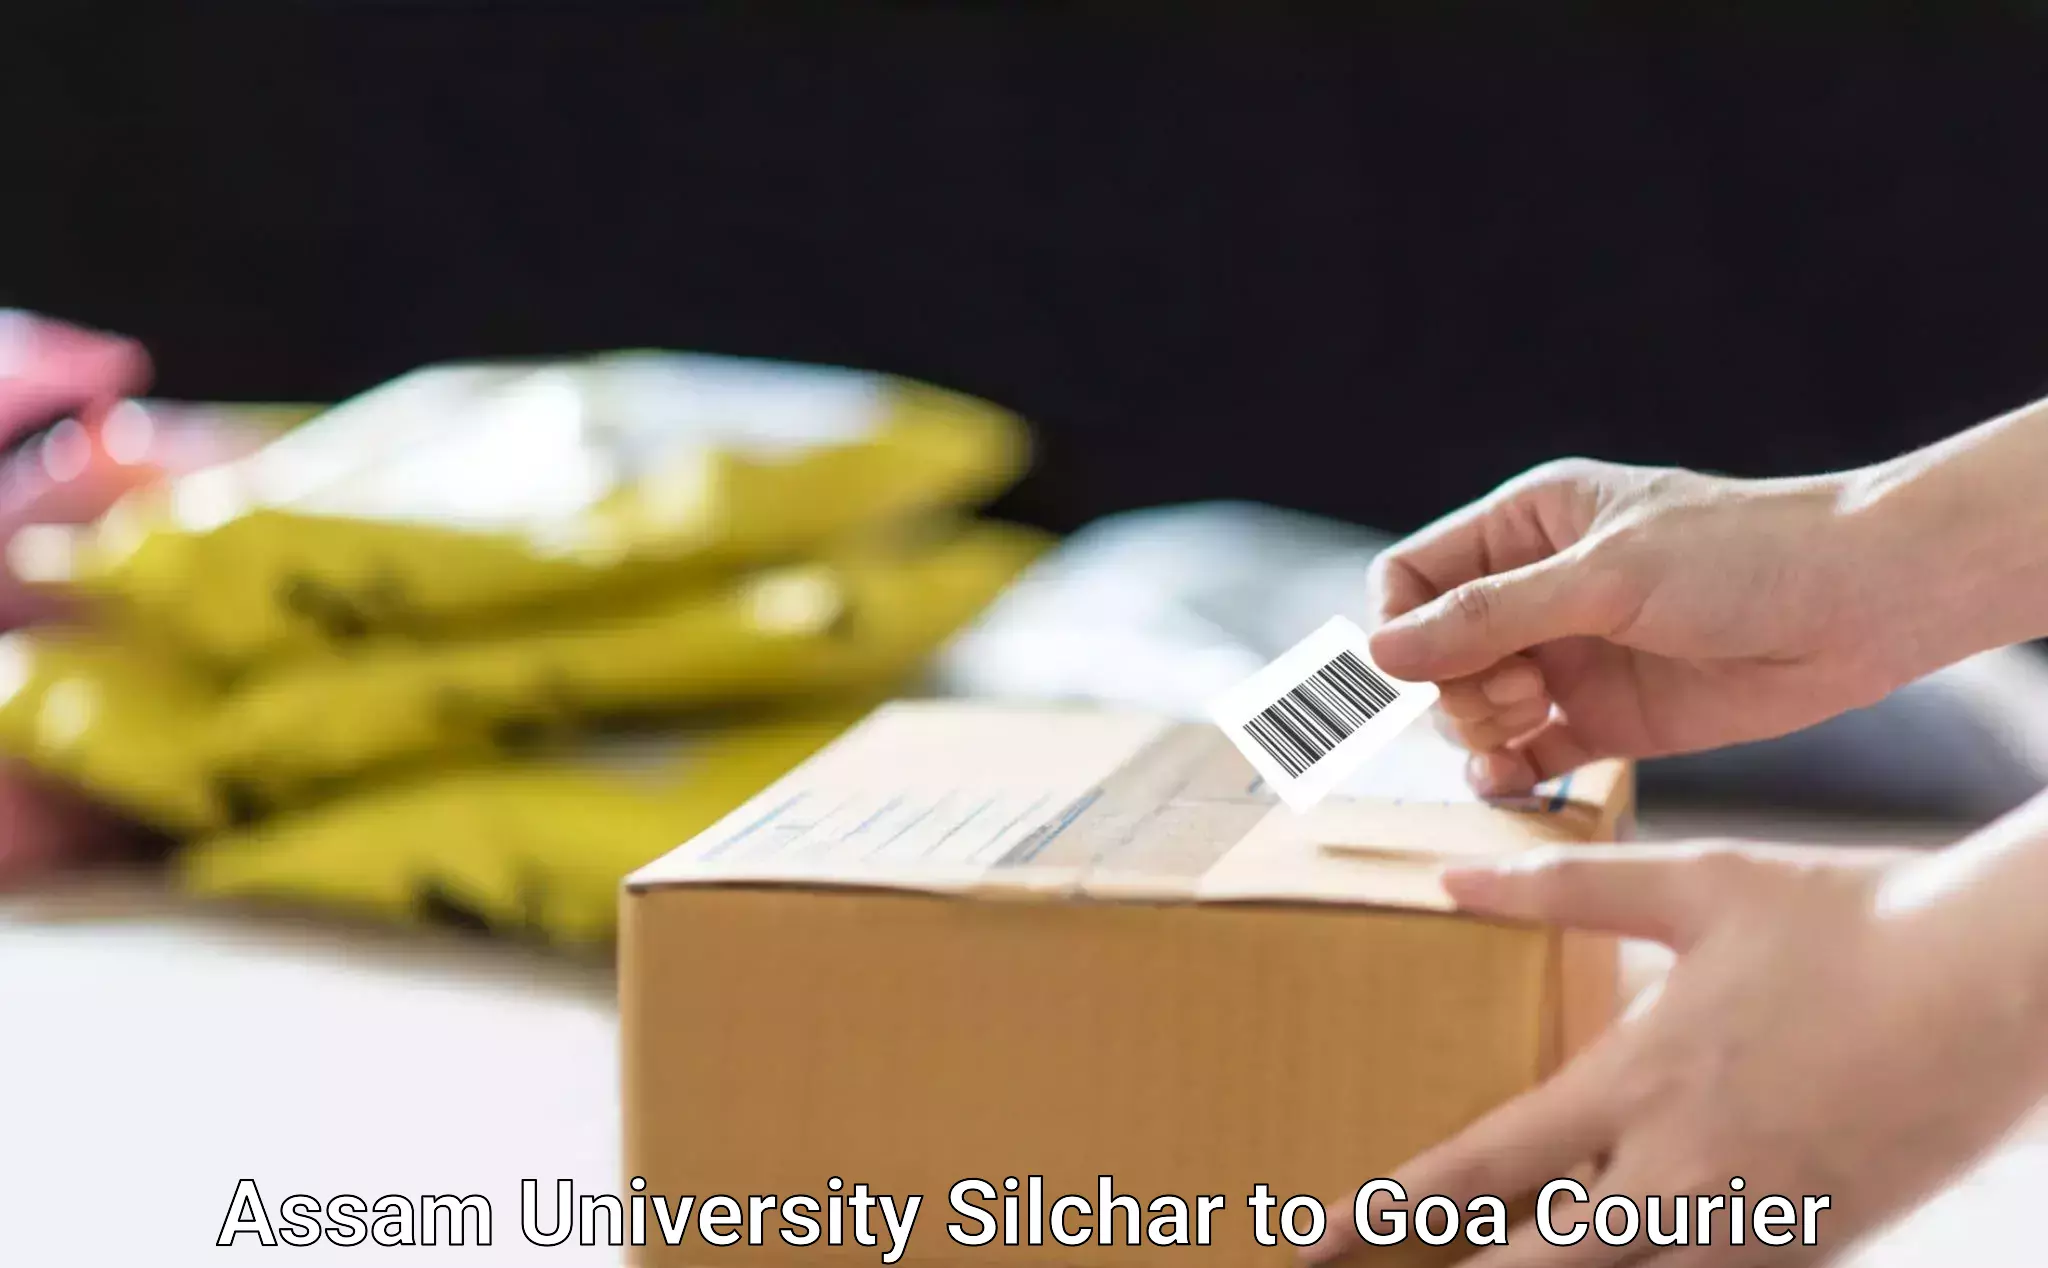 Large package courier Assam University Silchar to Goa